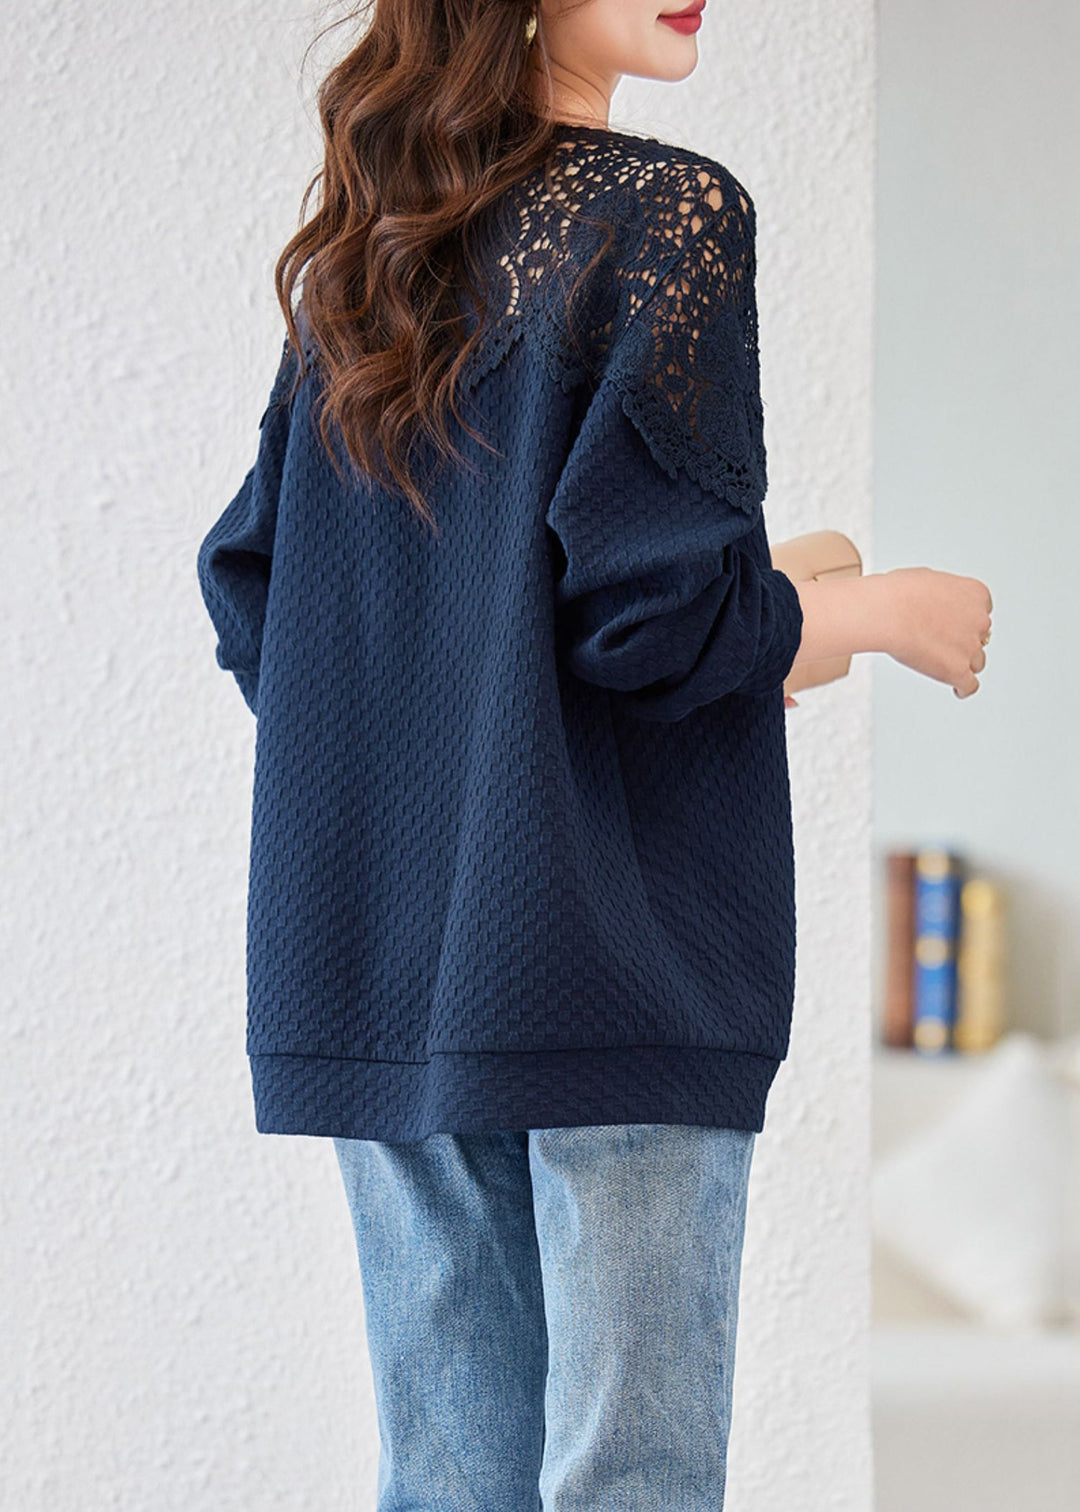 Chic Navy Embroideried Hollow Out Cotton Tops Spring